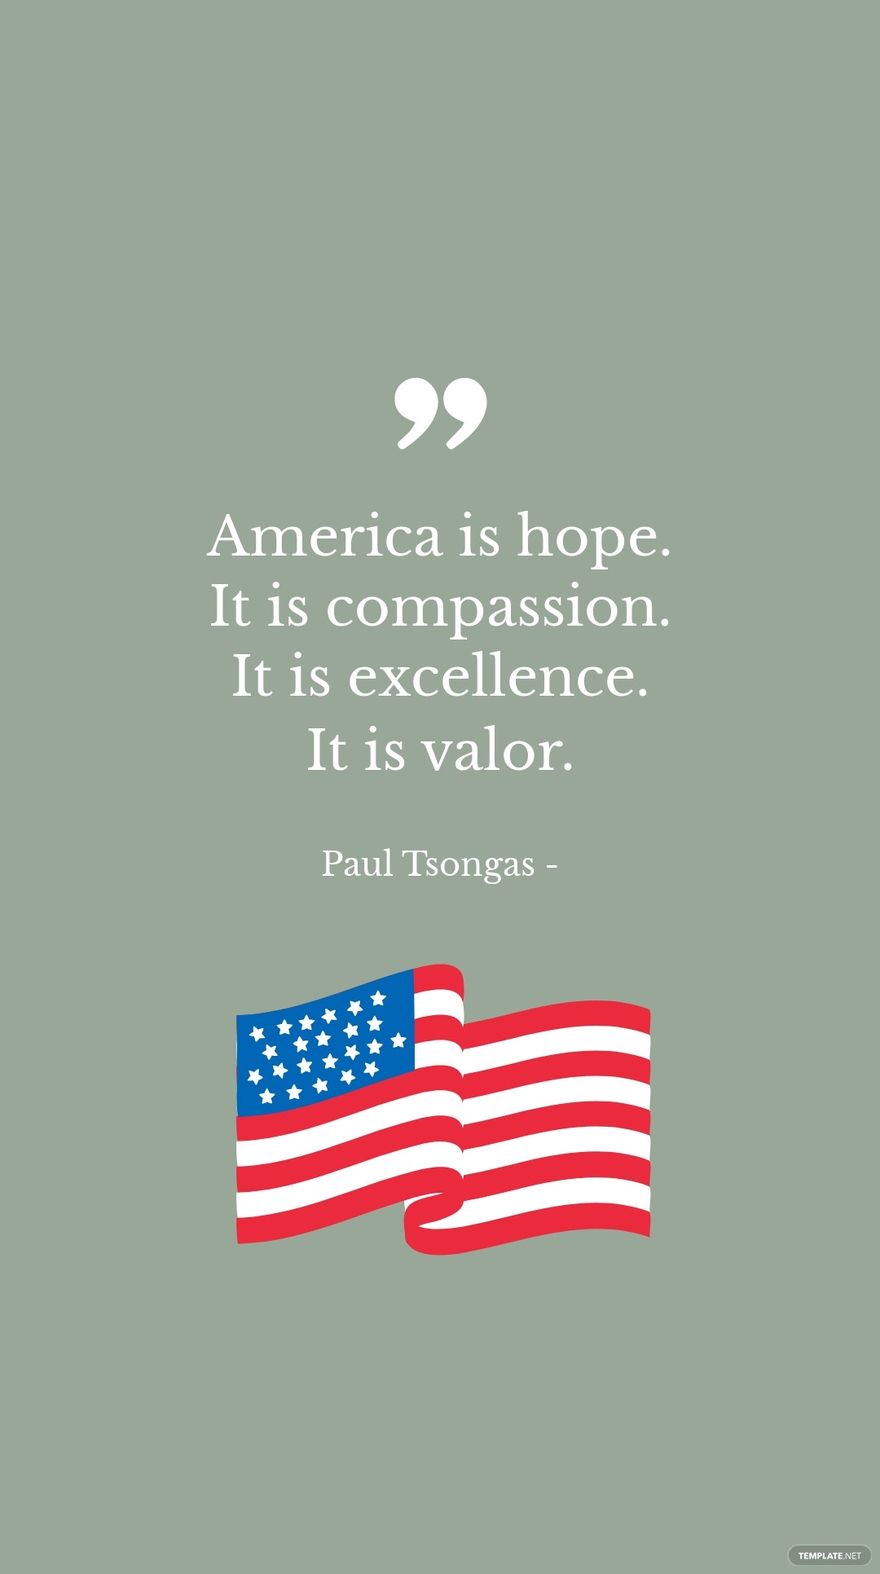 Free Paul Tsongas - America is hope. It is compassion. It is excellence. It is valor. in JPG